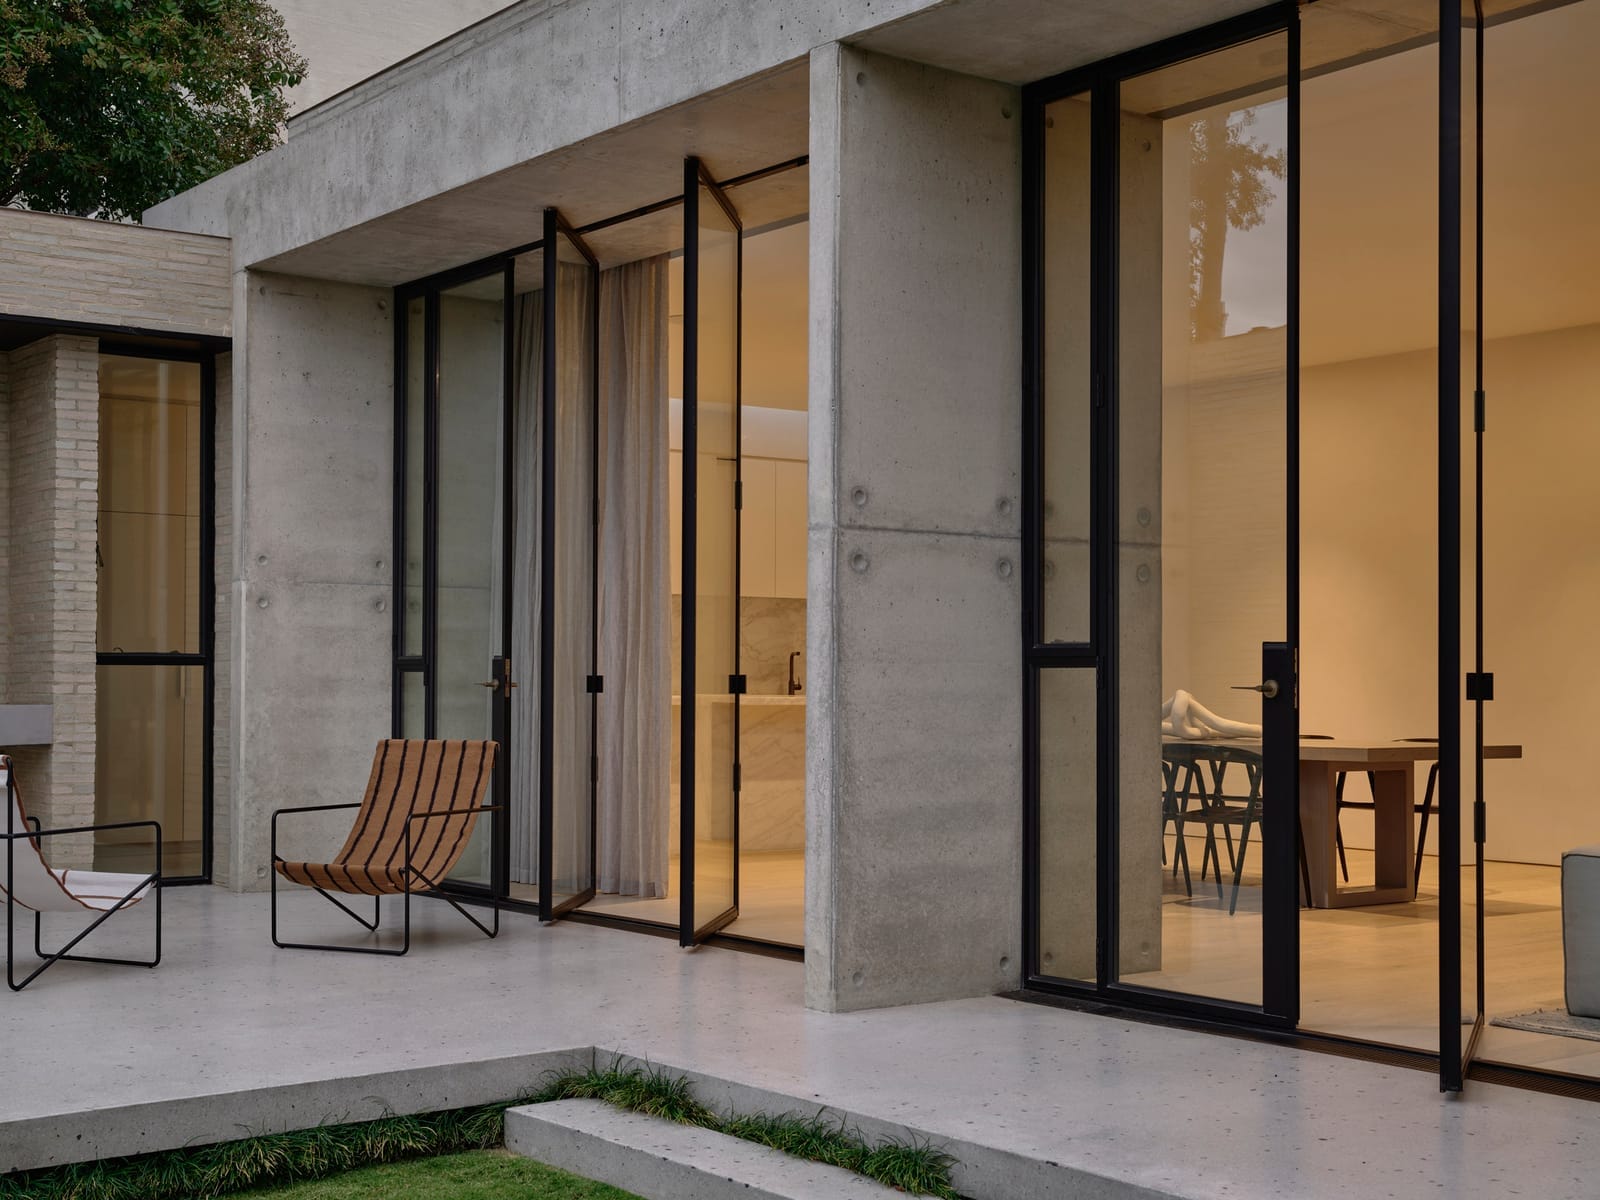 RE Residence by Inglis Architects.The image depicts an evening view of a modern architectural residence with a concrete facade. Large floor-to-ceiling glass doors with black frames open onto a patio. One of the doors is ajar, inviting a look into the warmly lit interior. On the patio, there is a metal frame chair with a wooden slat seat and backrest, enhancing the minimalist aesthetic of the home.